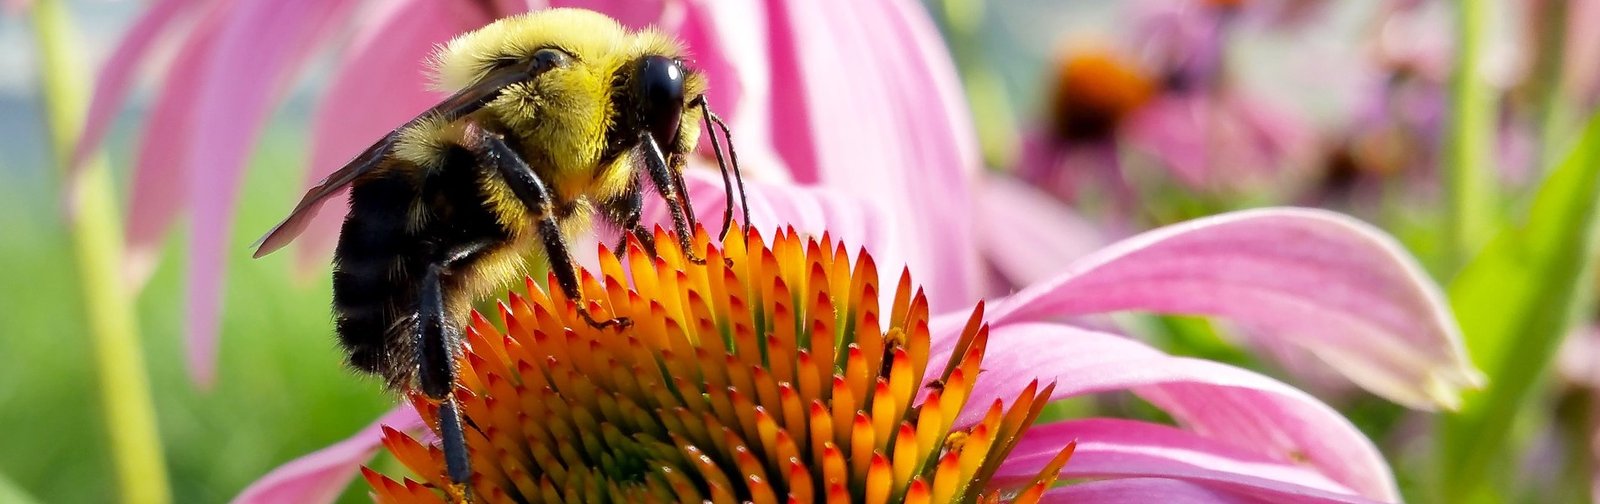 Photo of a bumble bee extracting nectar from a flowering plant